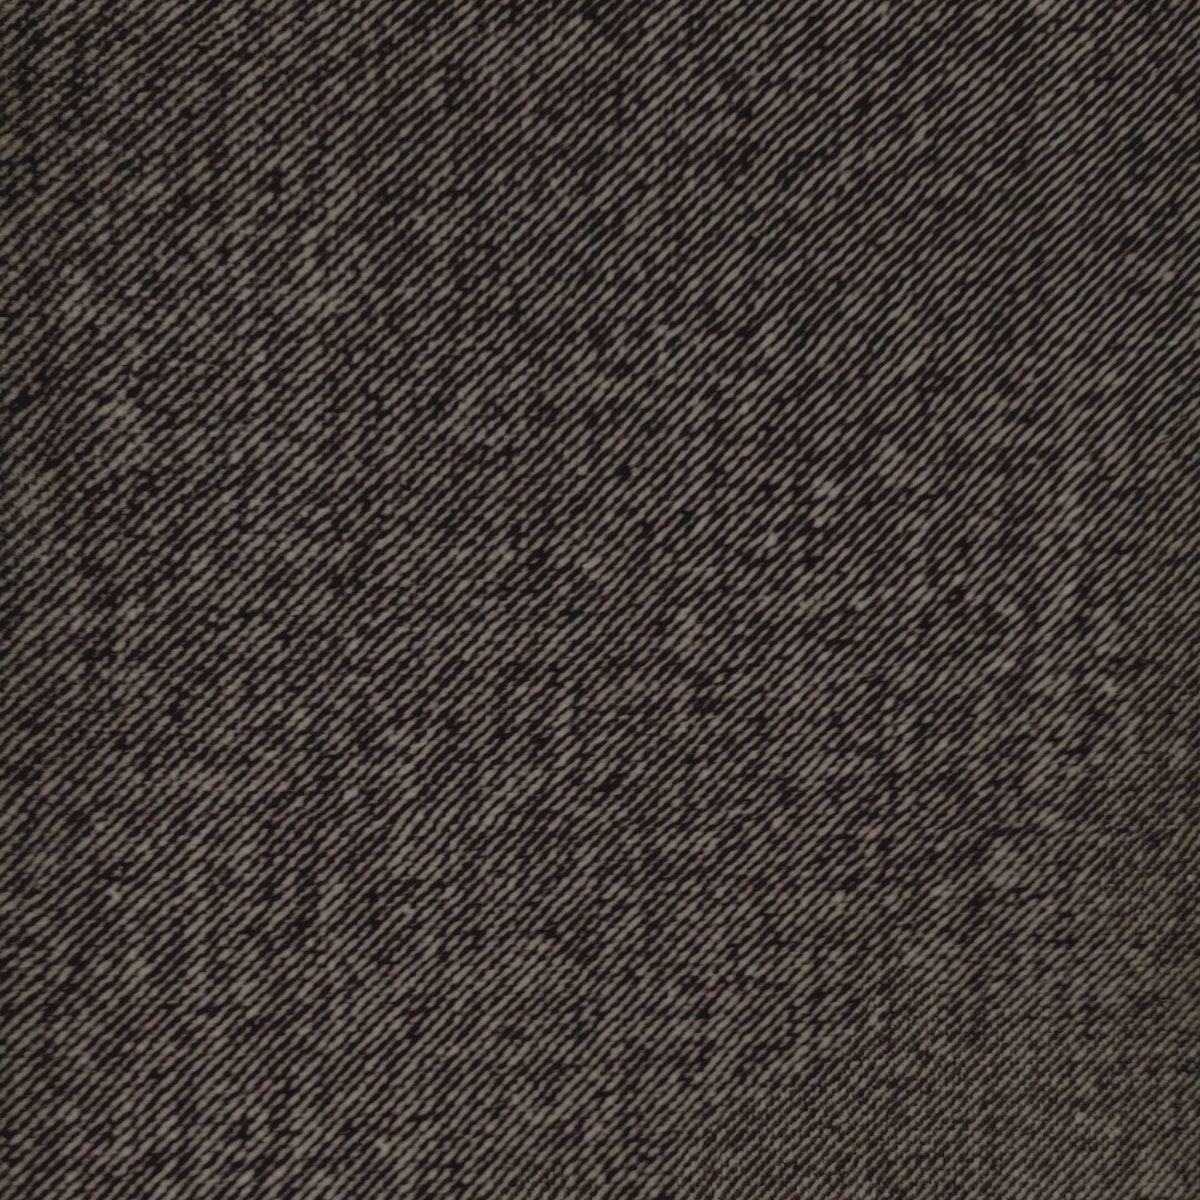 durable upholstery fabric in brown